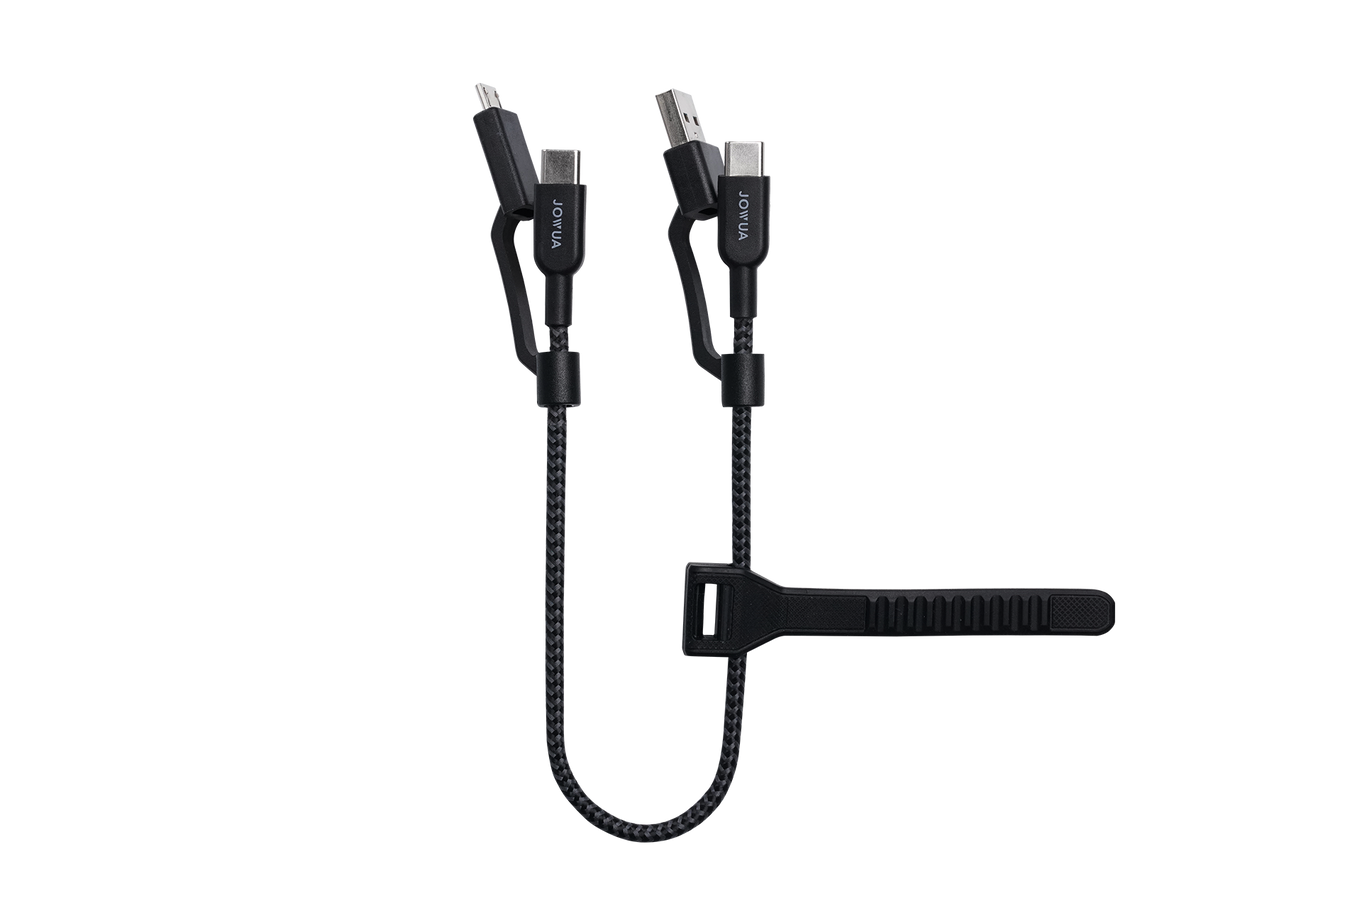 Jowua Universal Cable (4-in-1)